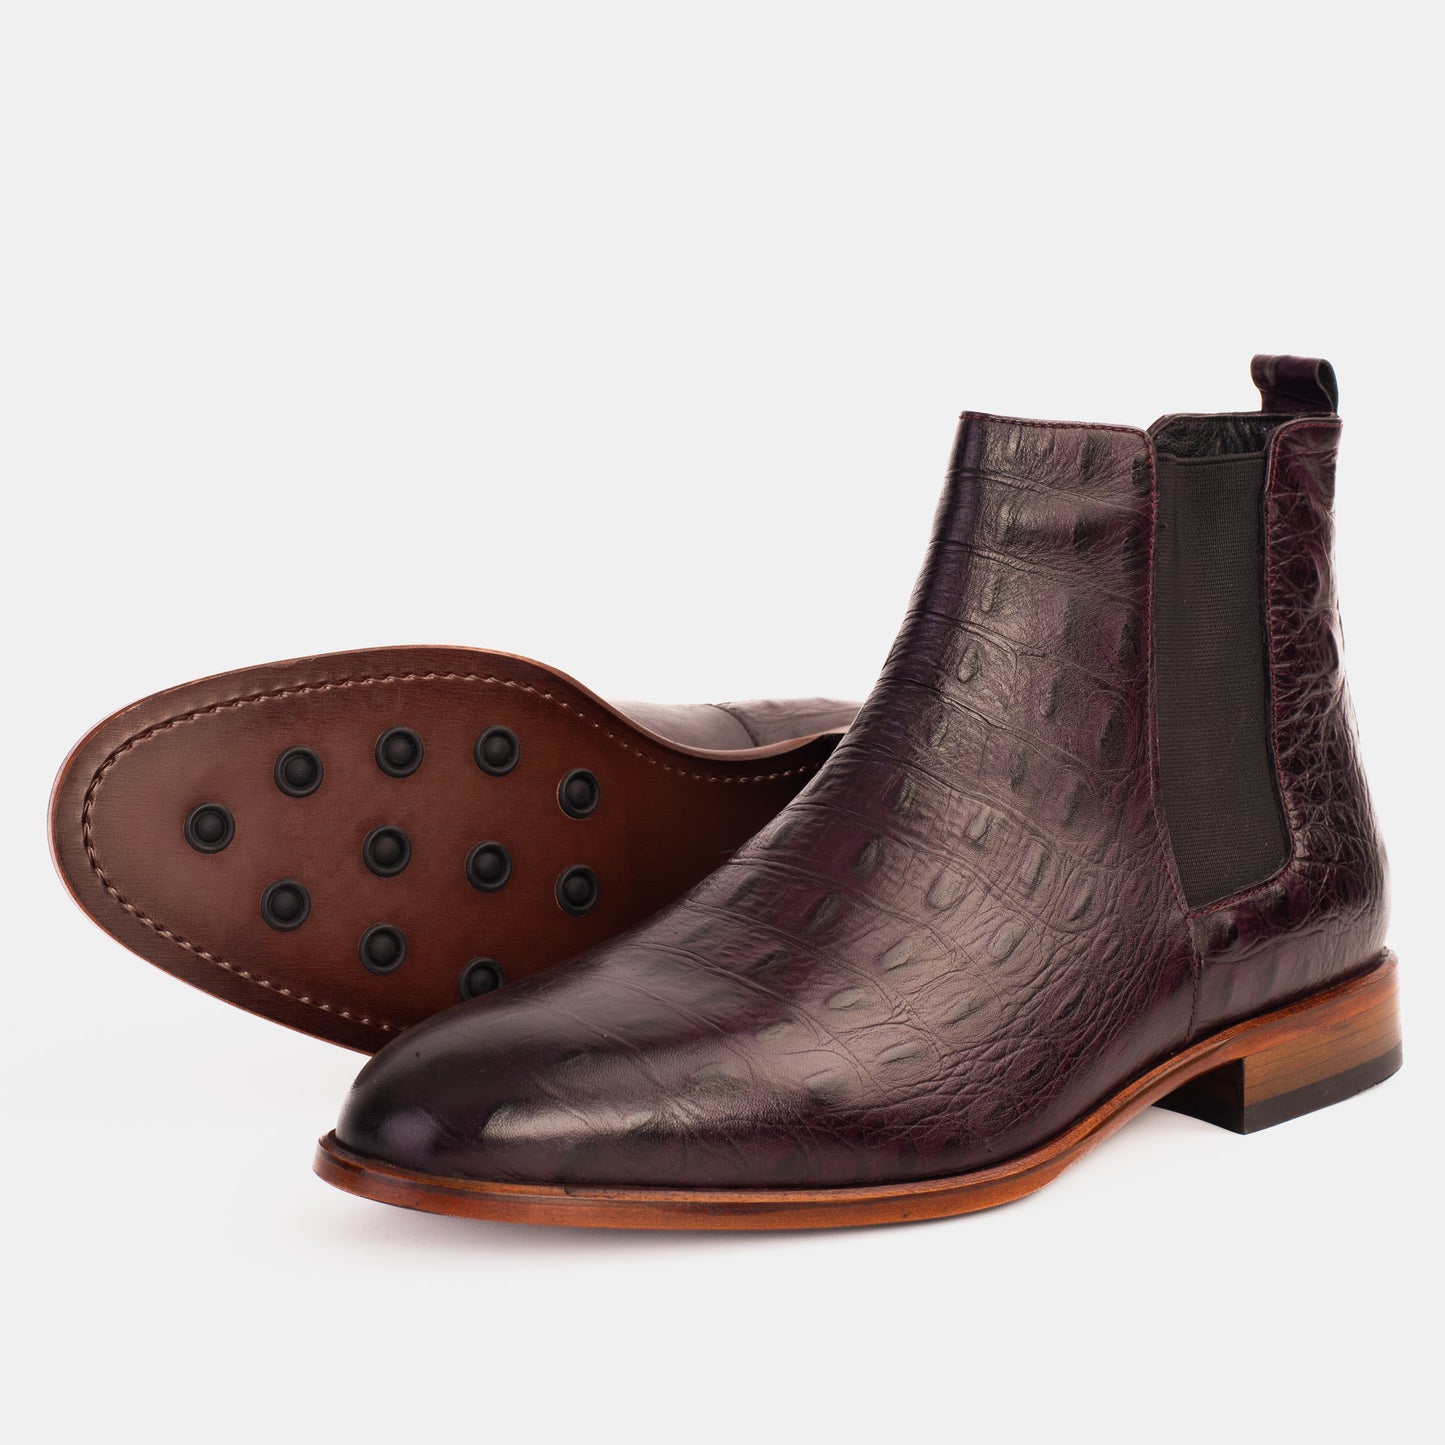 The Sirocco Burgundy Leather Chelsea Dress Men Boot